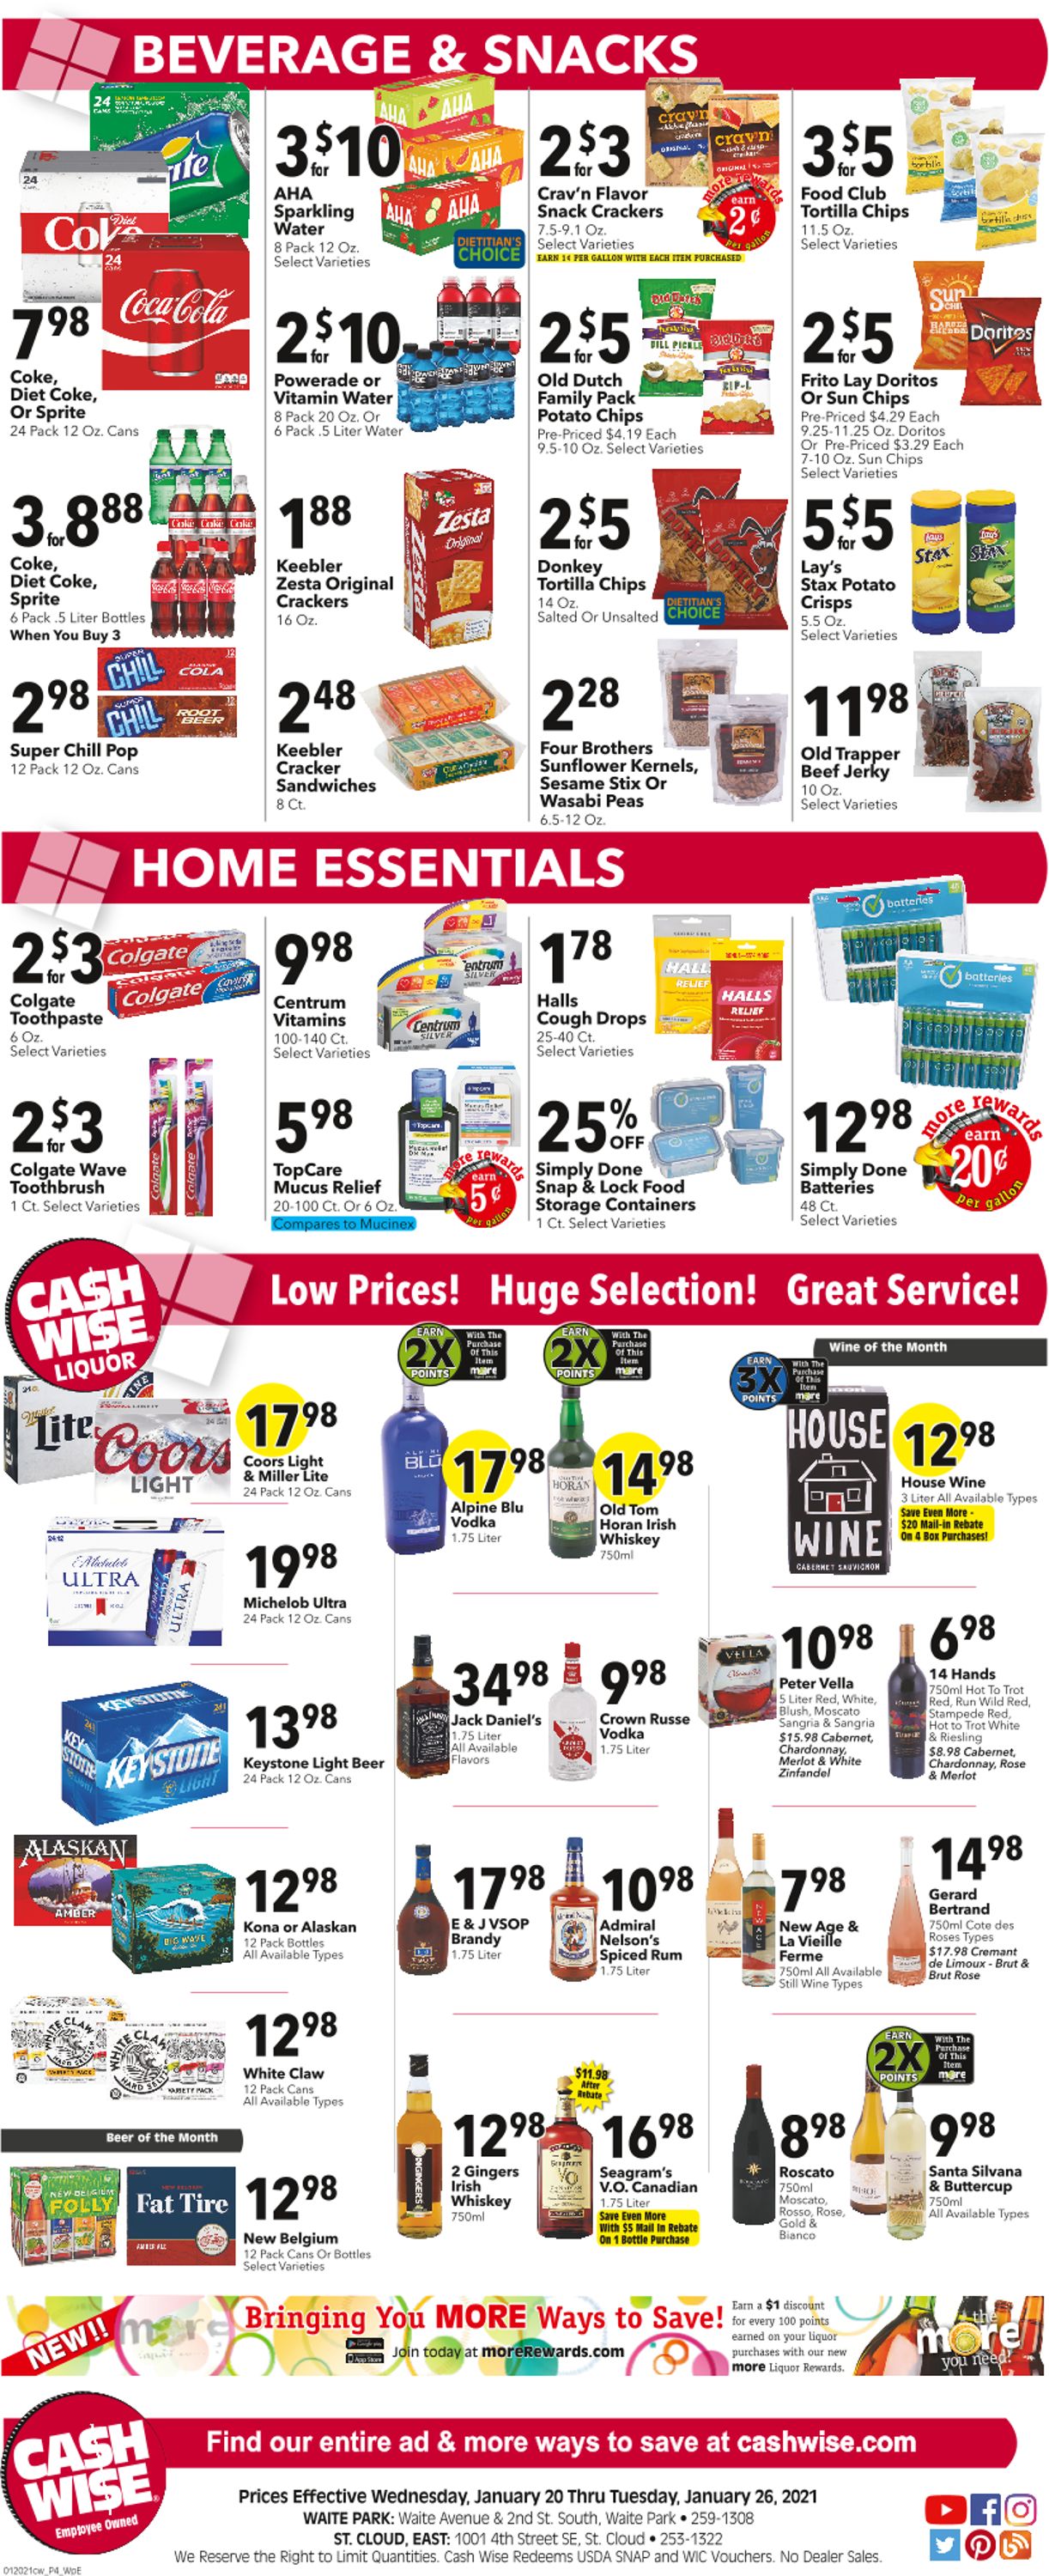 Cash Wise Weekly Ad Circular - valid 01/20-01/26/2021 (Page 4)